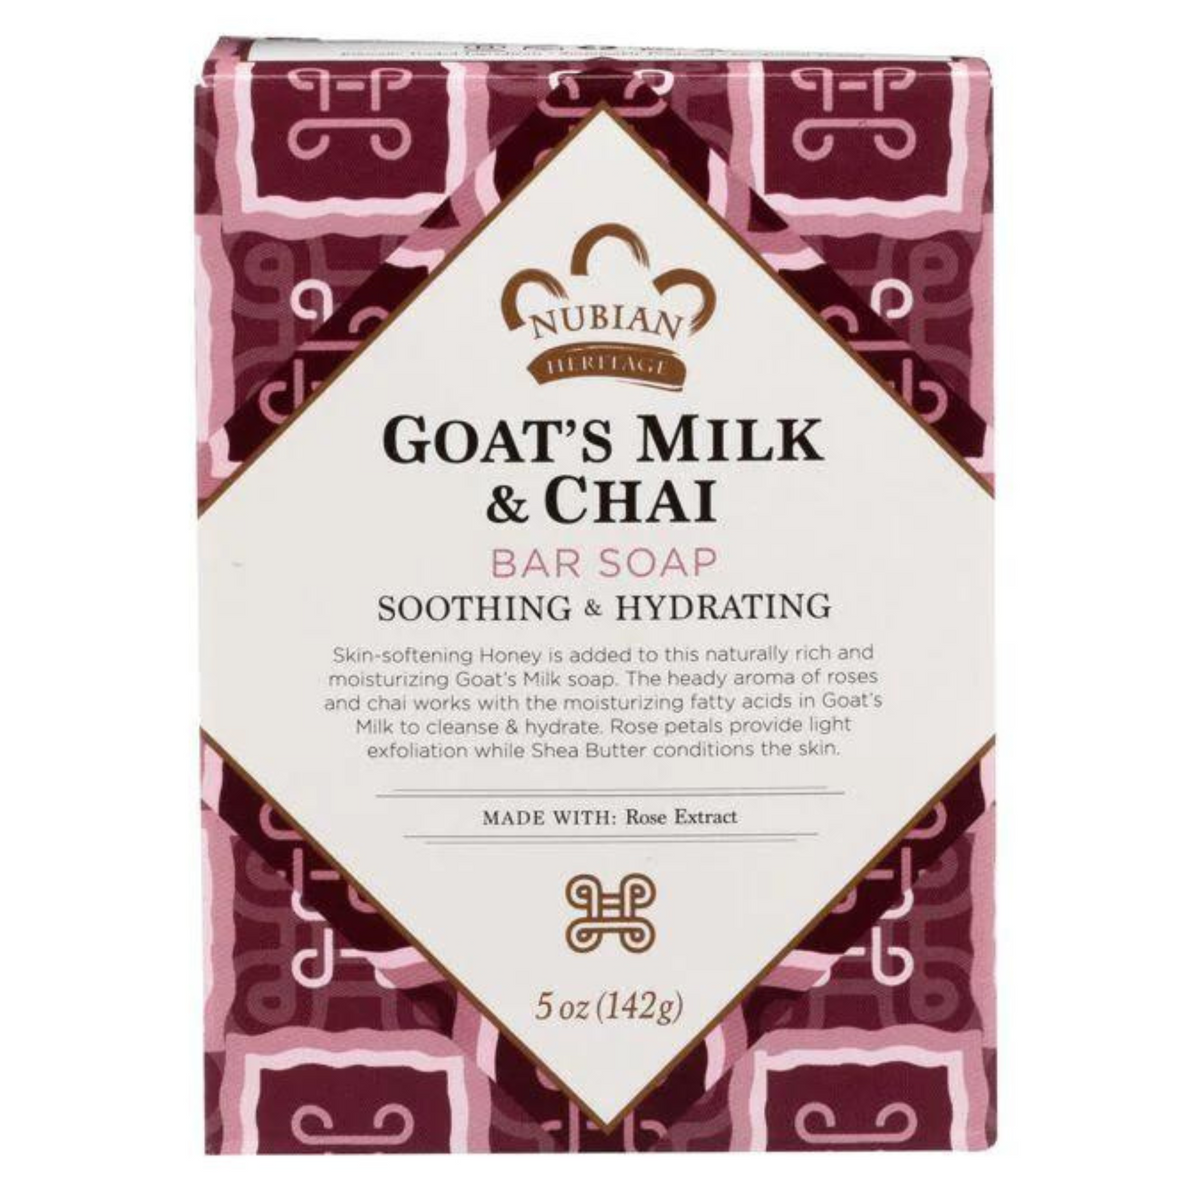 Primary Image of Nubian Heritage Goat's Milk and Chai Bar Soap (5 oz)